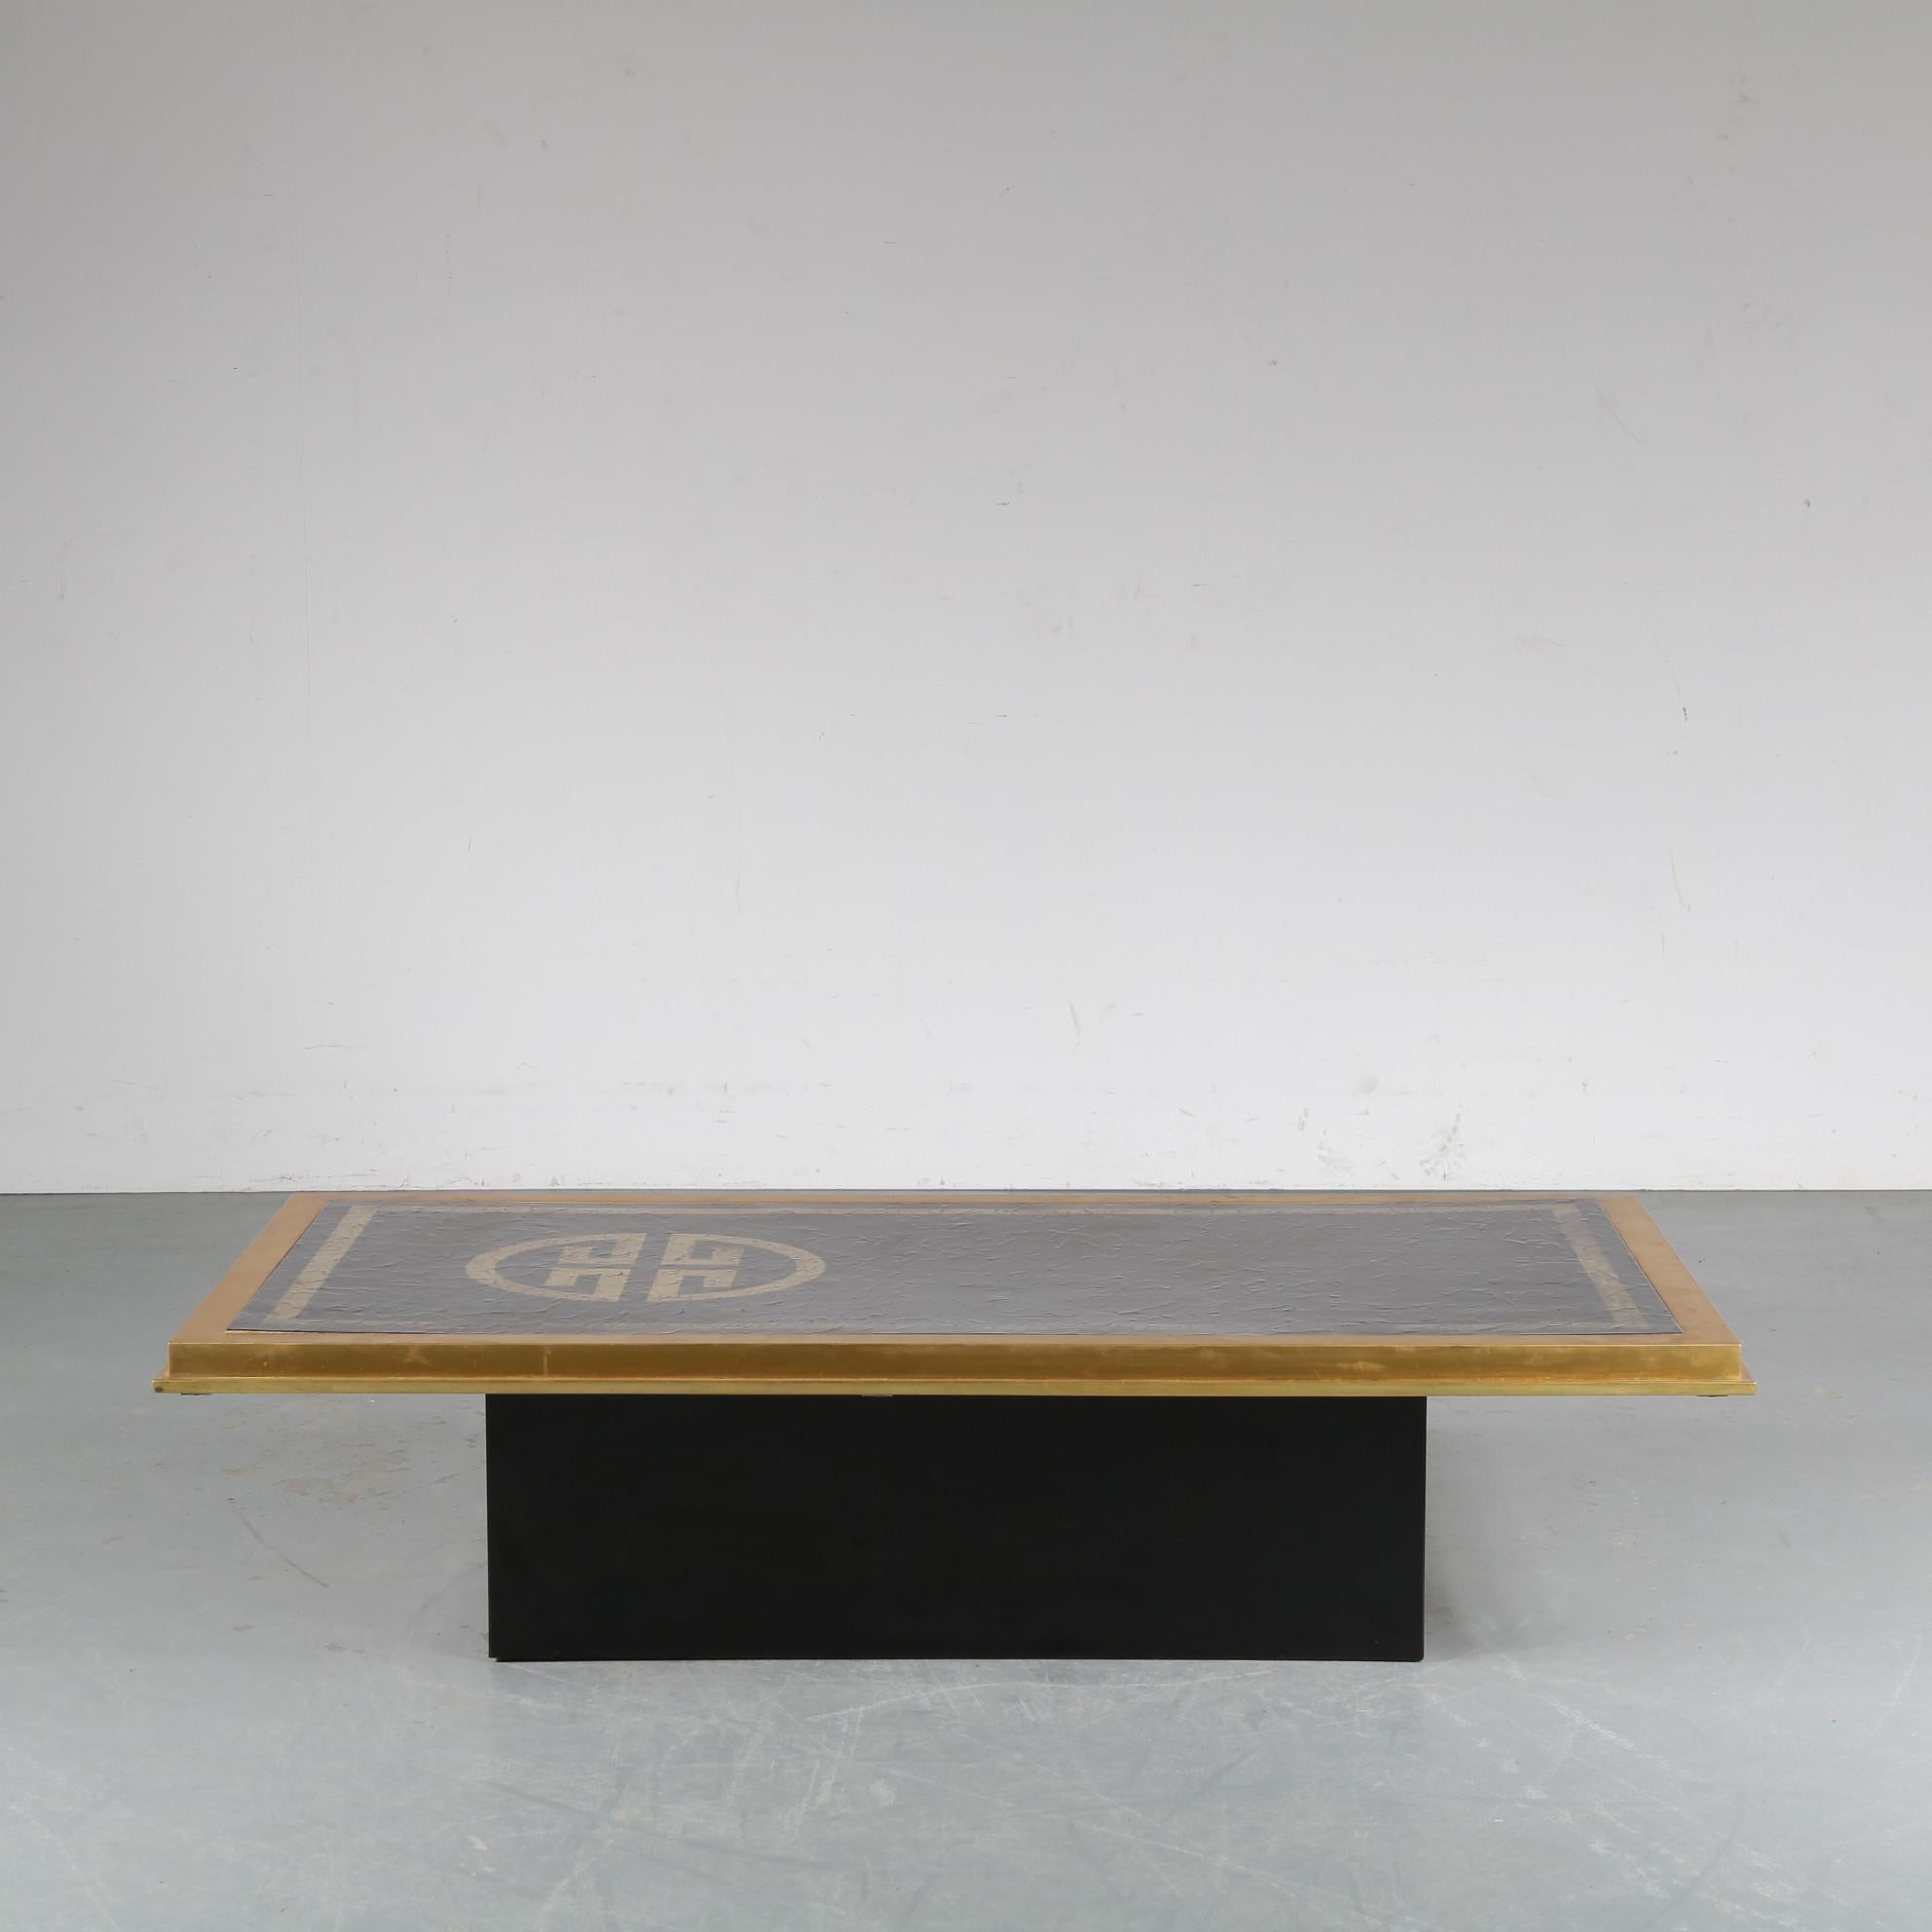 A unique coffee table, manufactured by Denisco in Italy around 1970.

It has a black lacuqered wooden base with brass and enameled steel top, with a unique pattern into the top. The black and brass is a very appealing combination that adds a